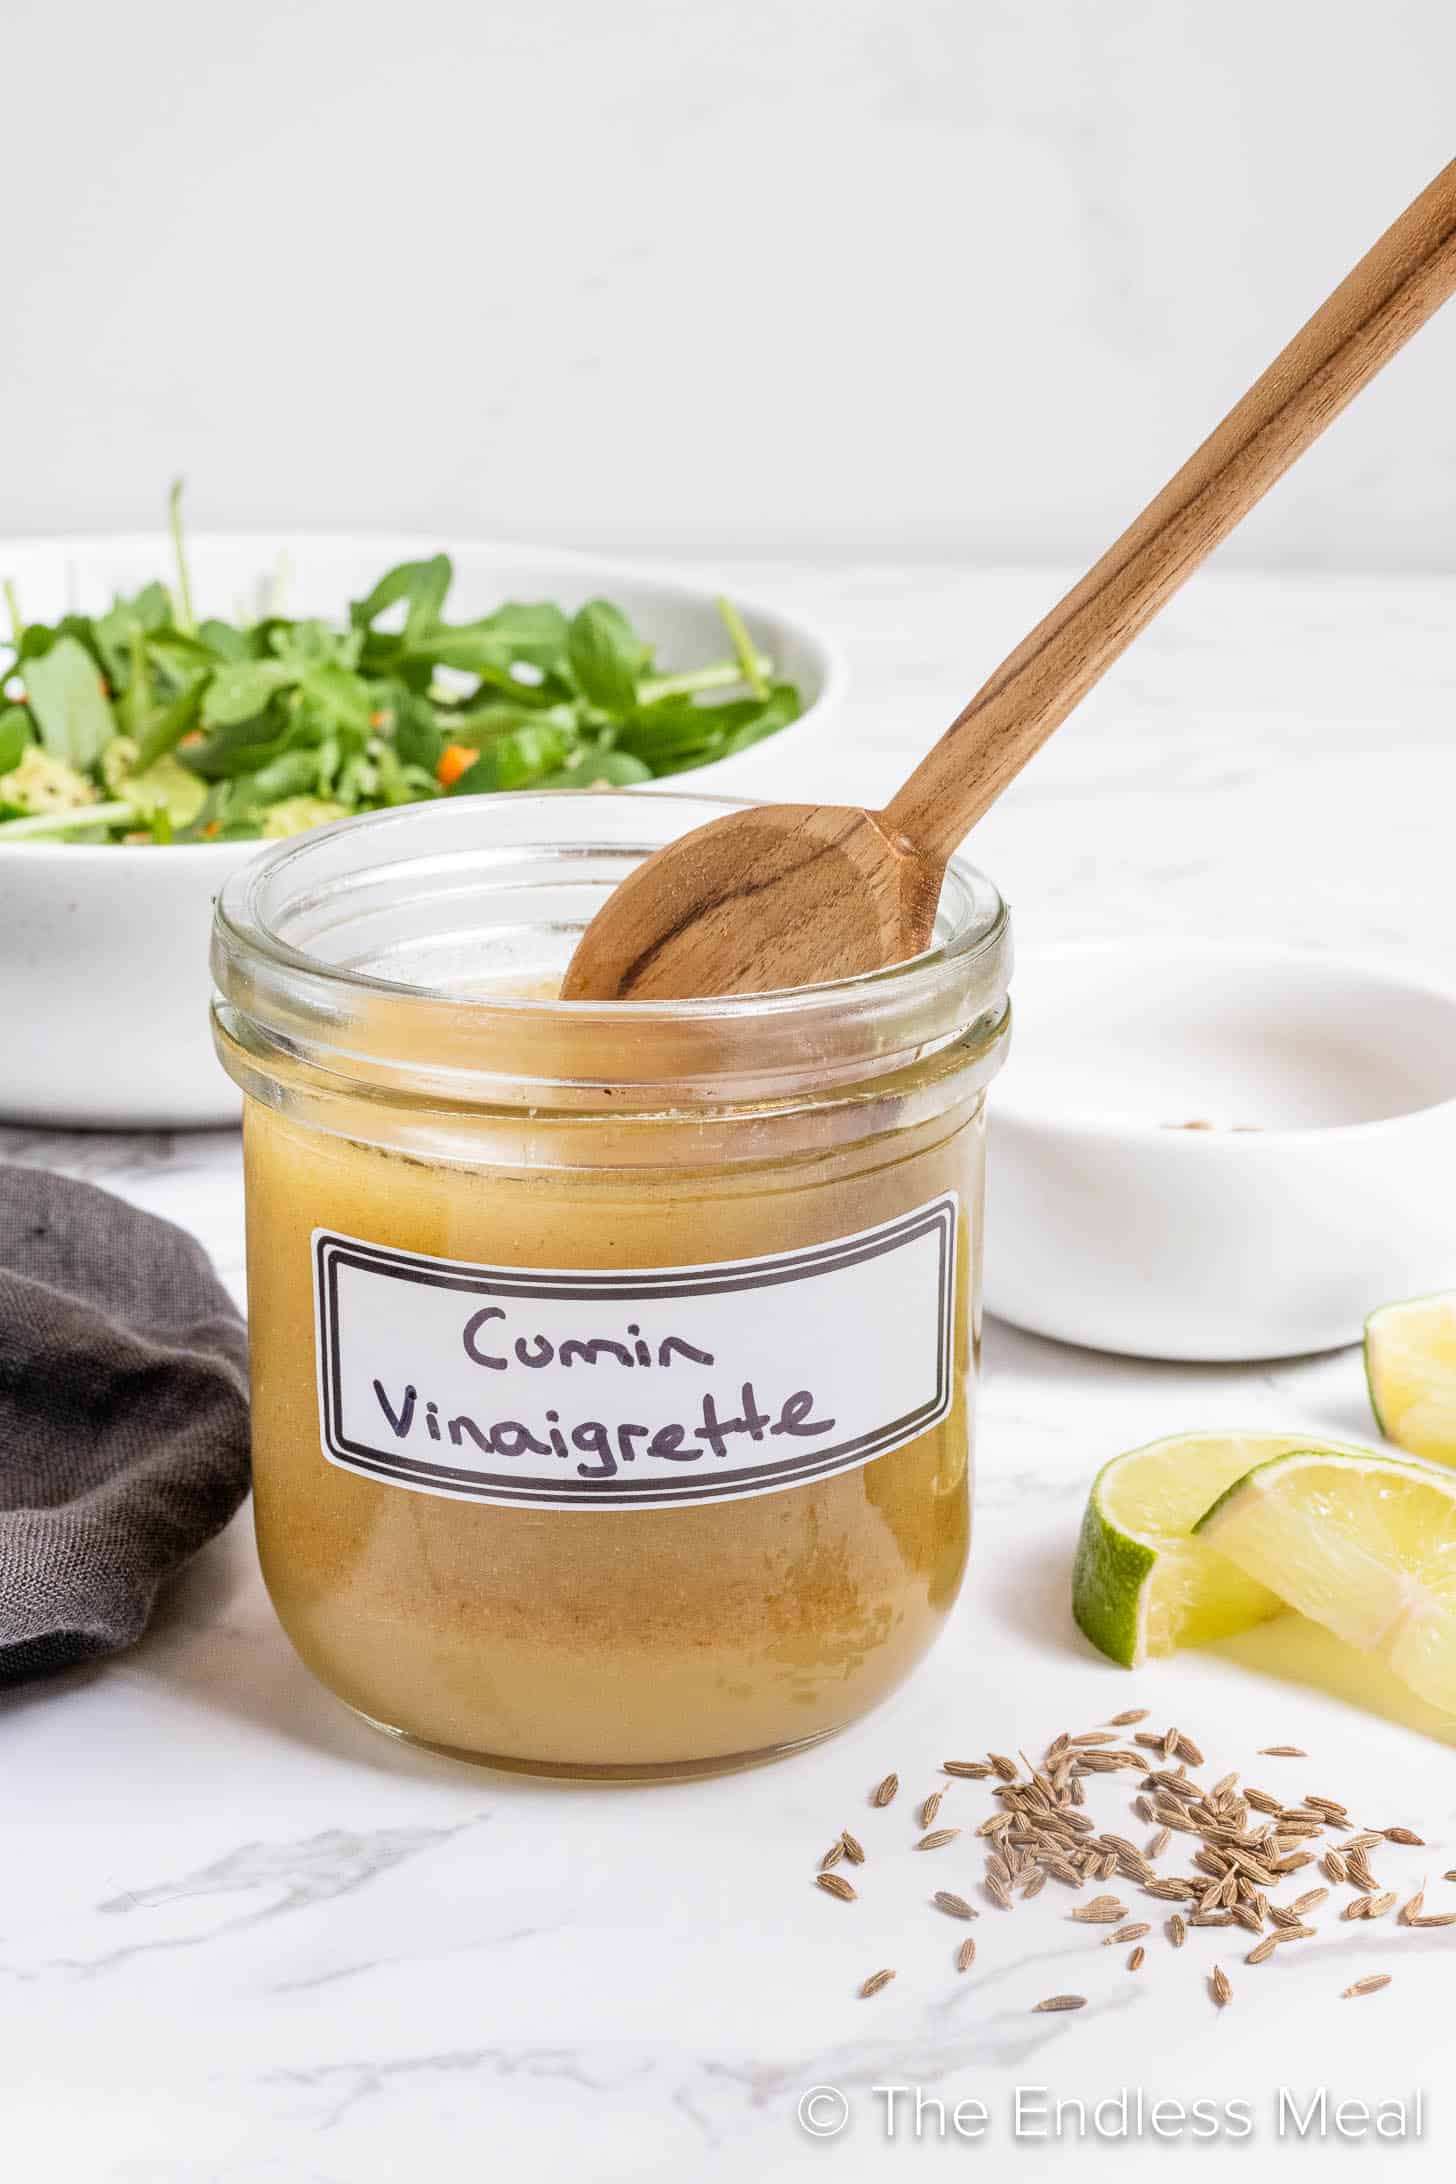 Cumin Lime Vinaigrette in a glass jar with a salad